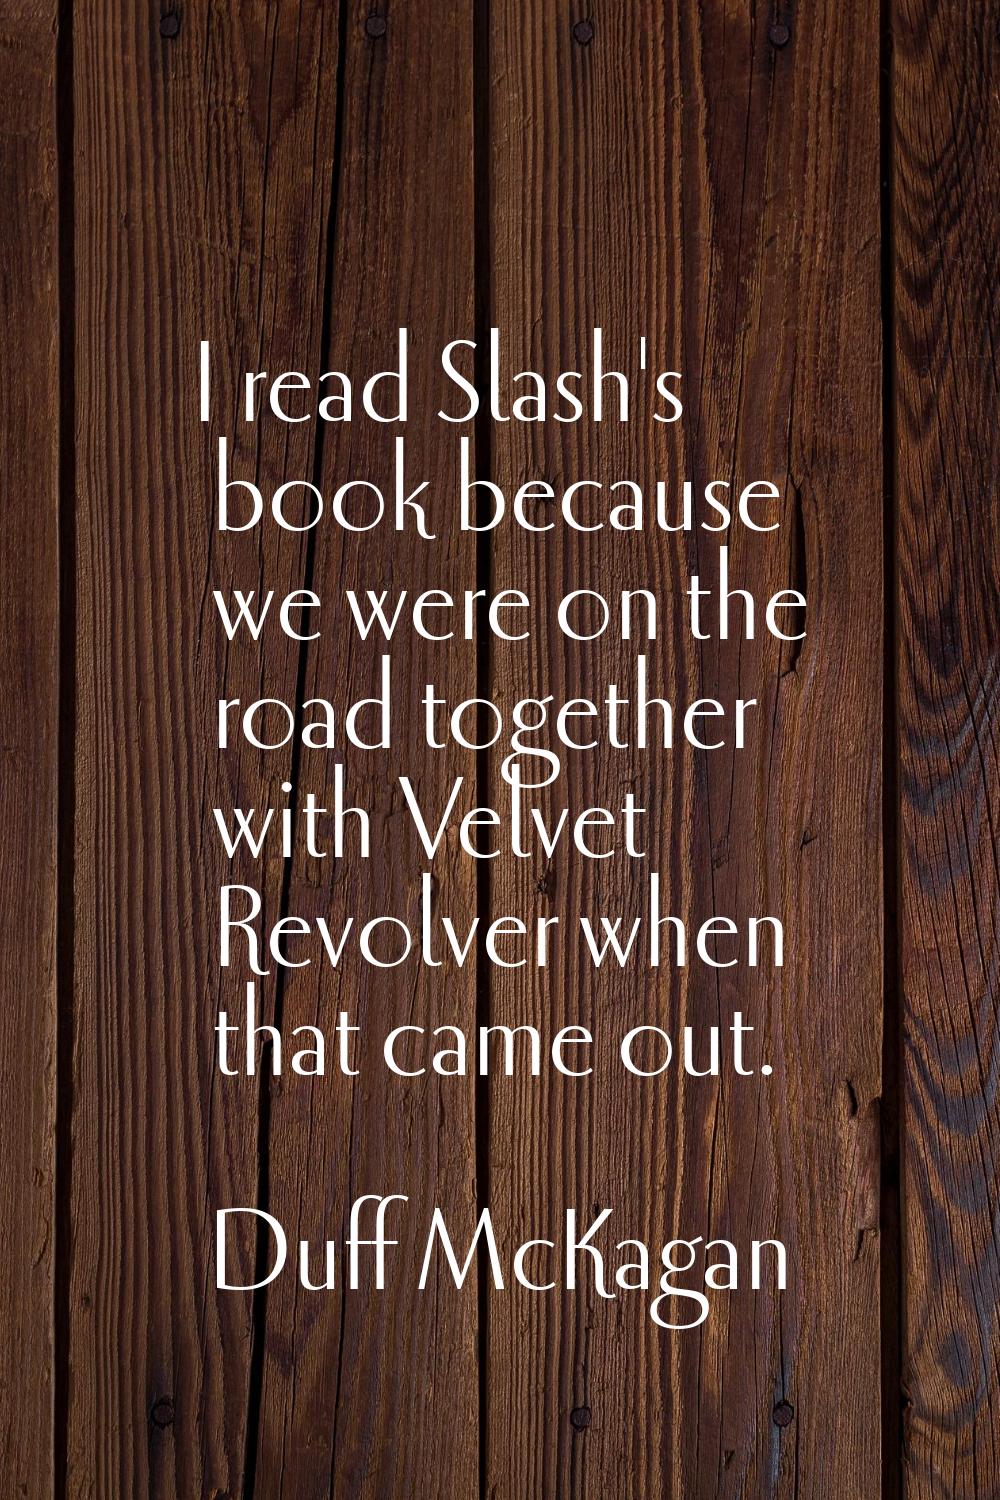 I read Slash's book because we were on the road together with Velvet Revolver when that came out.